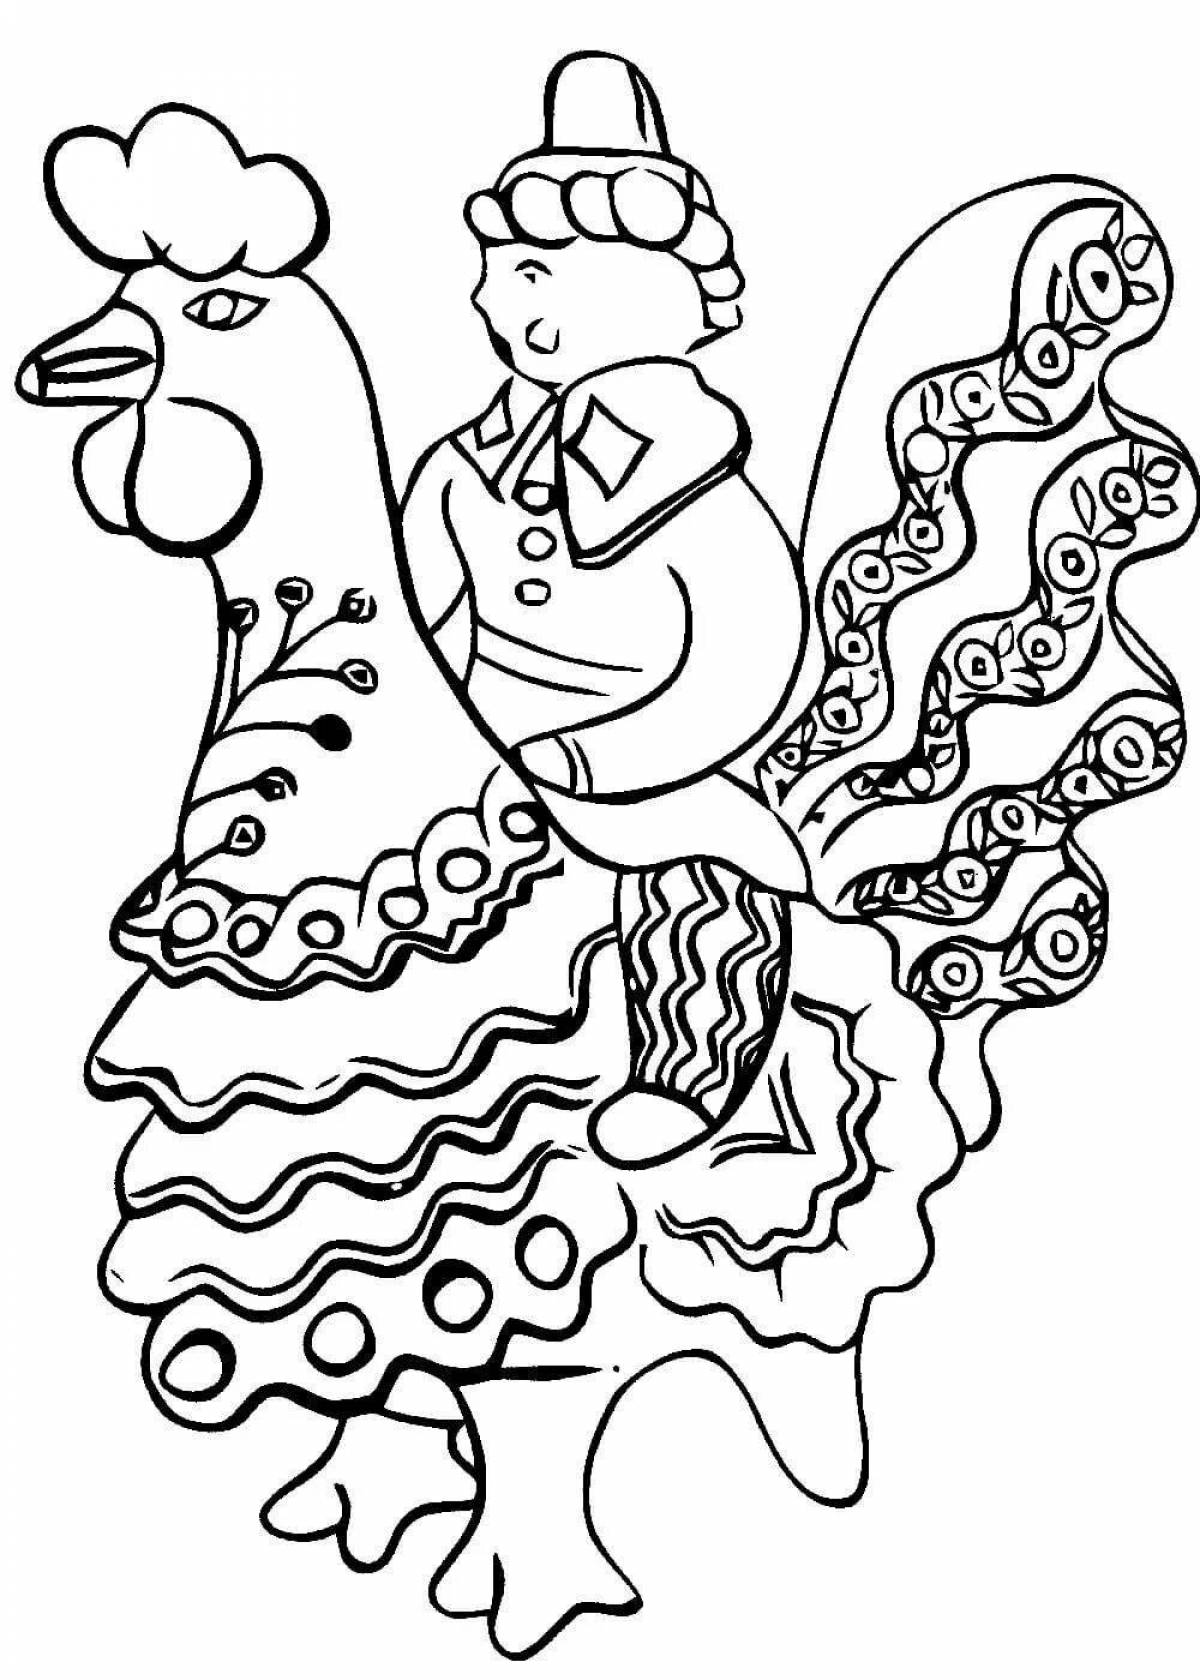 Dymkovo rooster coloring book for preschoolers